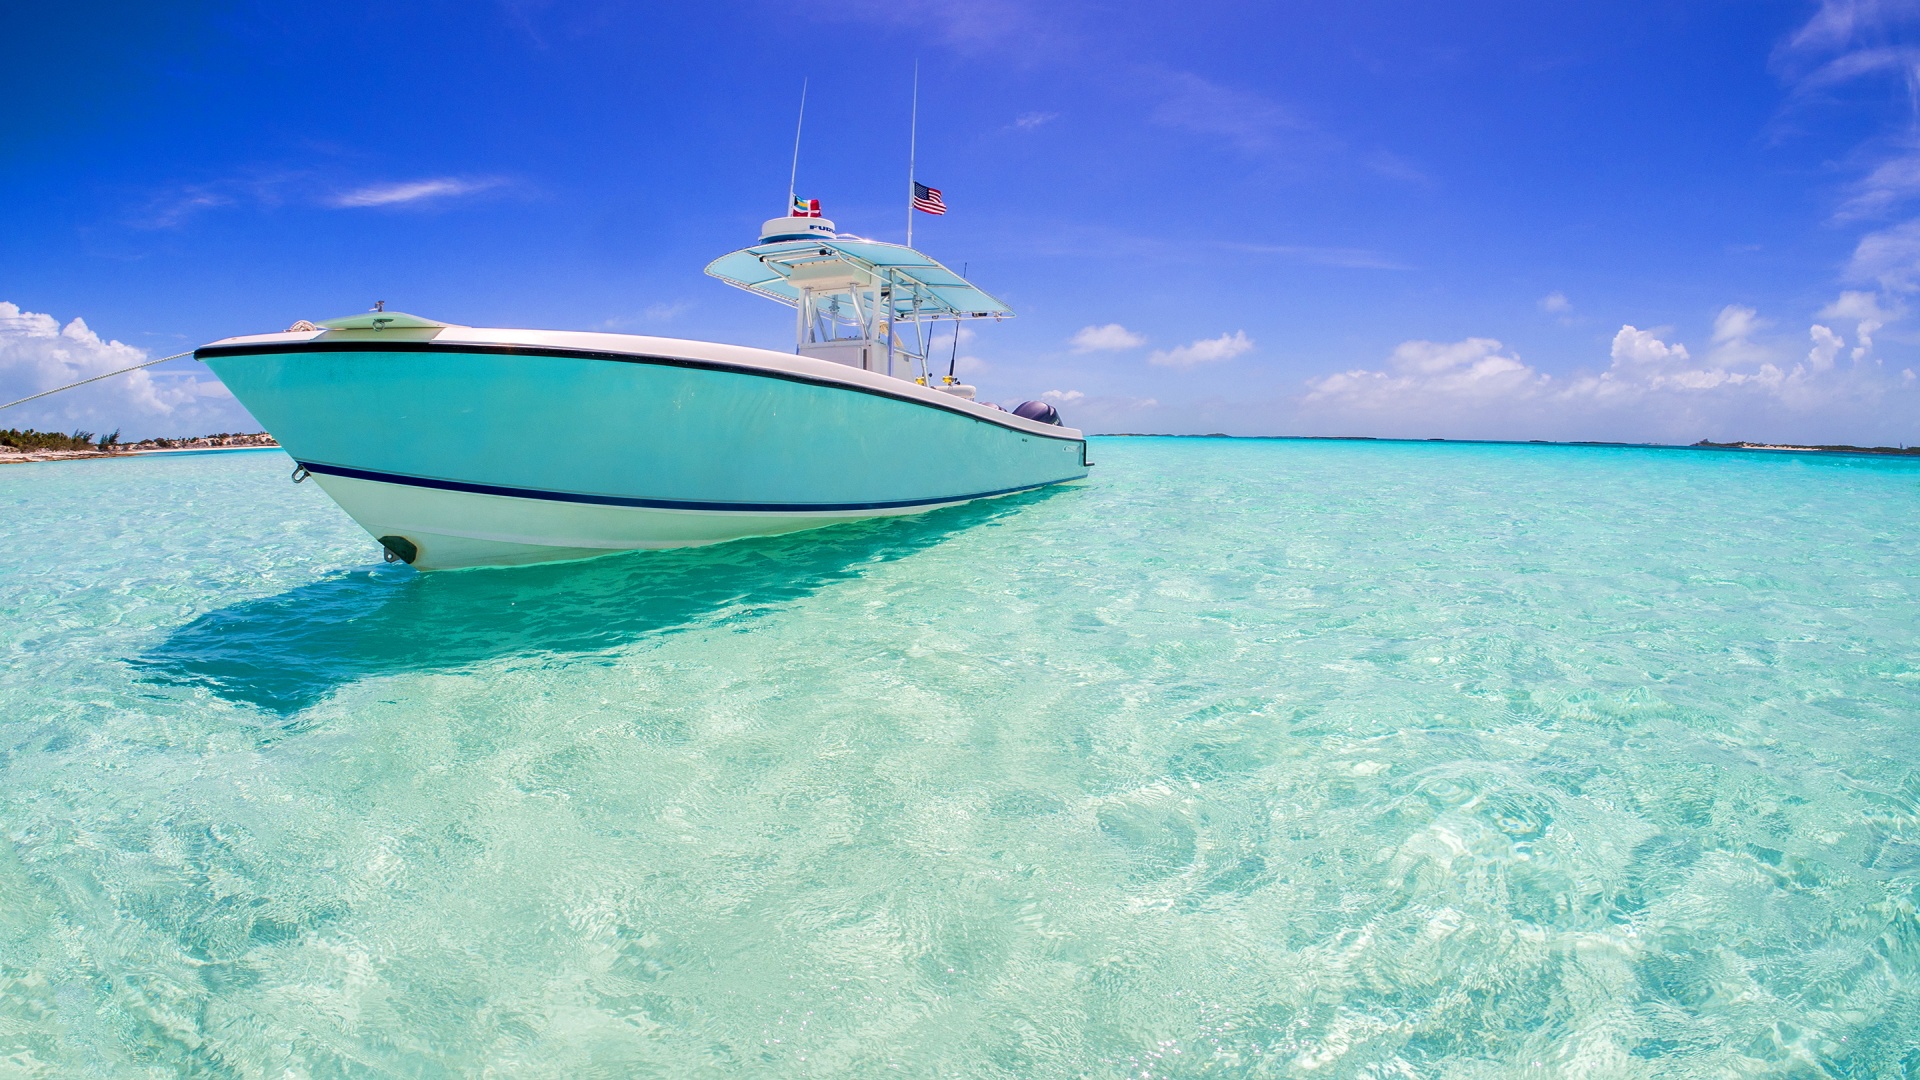 Blue Ocean Speed Boat Turquoise Vehicle 1920x1080